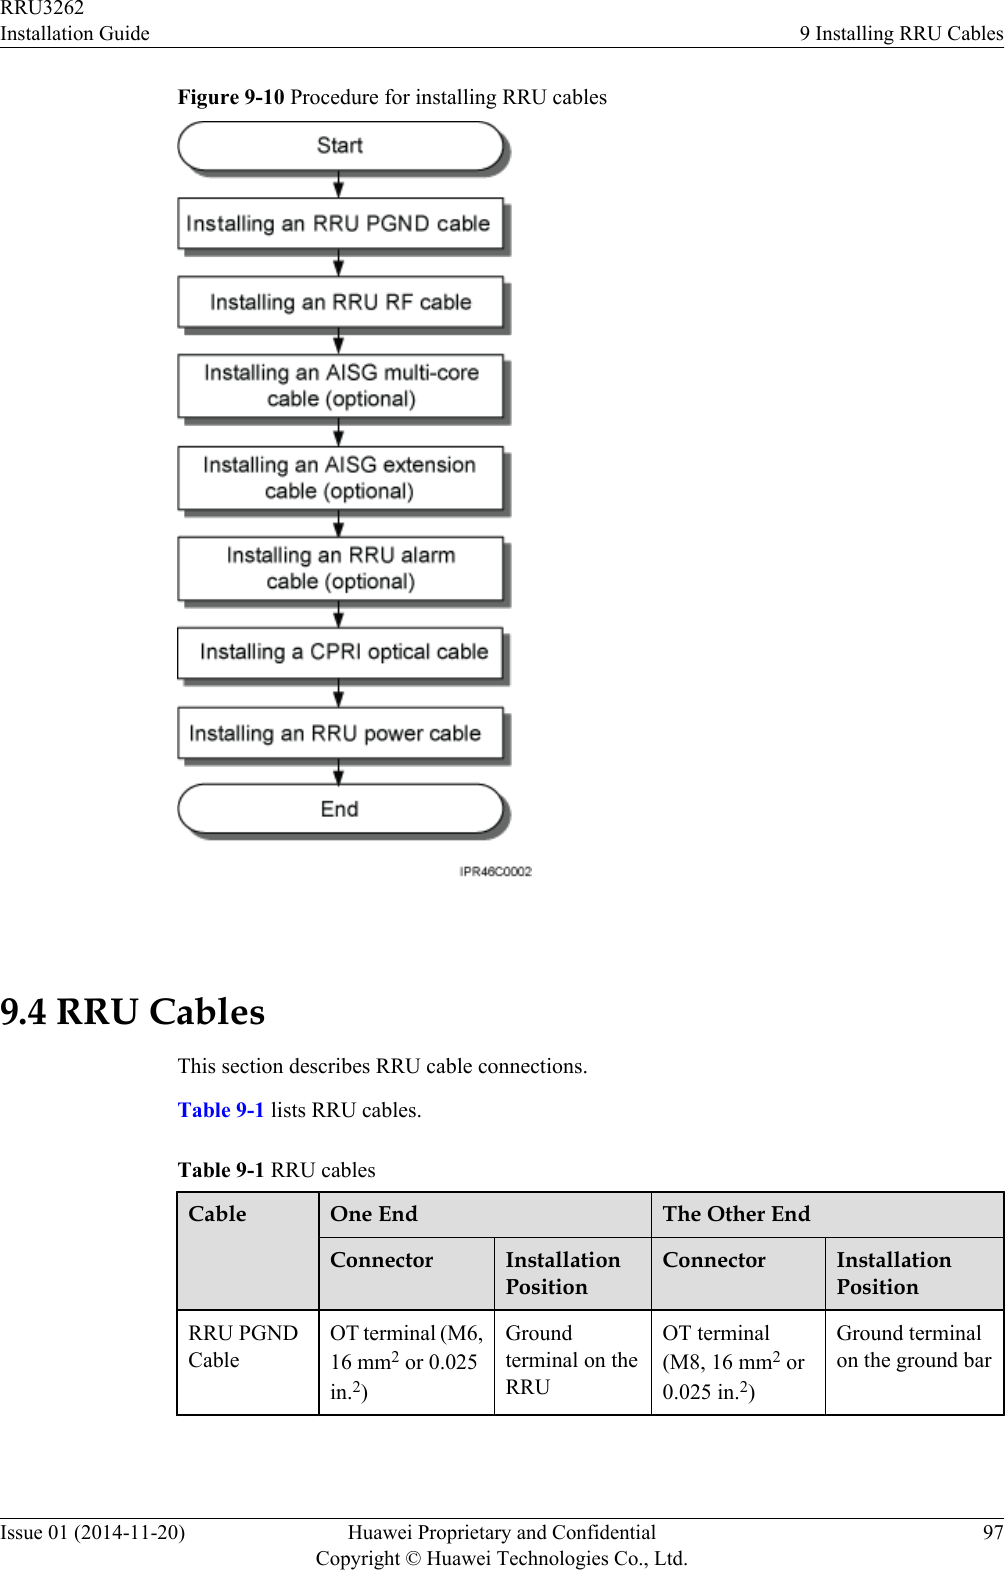 Figure 9-10 Procedure for installing RRU cables 9.4 RRU CablesThis section describes RRU cable connections.Table 9-1 lists RRU cables.Table 9-1 RRU cablesCable One End The Other EndConnector InstallationPositionConnector InstallationPositionRRU PGNDCableOT terminal (M6,16 mm2 or 0.025in.2)Groundterminal on theRRUOT terminal(M8, 16 mm2 or0.025 in.2)Ground terminalon the ground barRRU3262Installation Guide 9 Installing RRU CablesIssue 01 (2014-11-20) Huawei Proprietary and ConfidentialCopyright © Huawei Technologies Co., Ltd.97